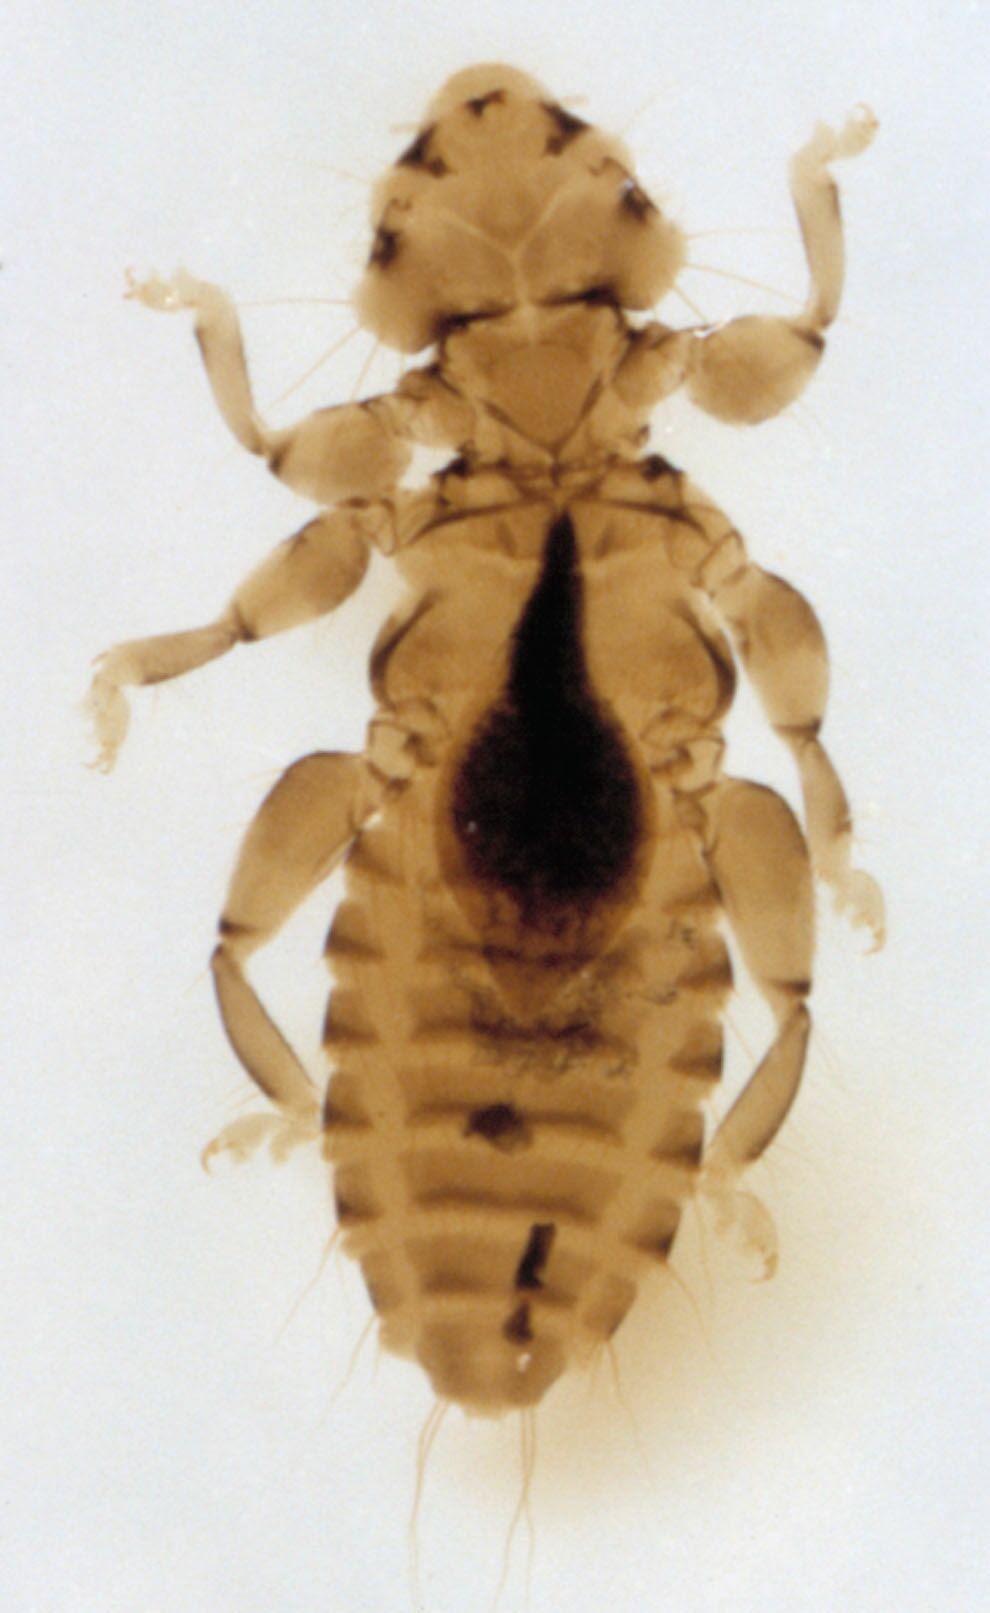 infest ducks, turkeys and guinea hens if they are housed close to infested chickens. Figure 2. Wing louse. Figure 1. Shaft louse. The fluff louse is a small louse species approximately 1 mm long.